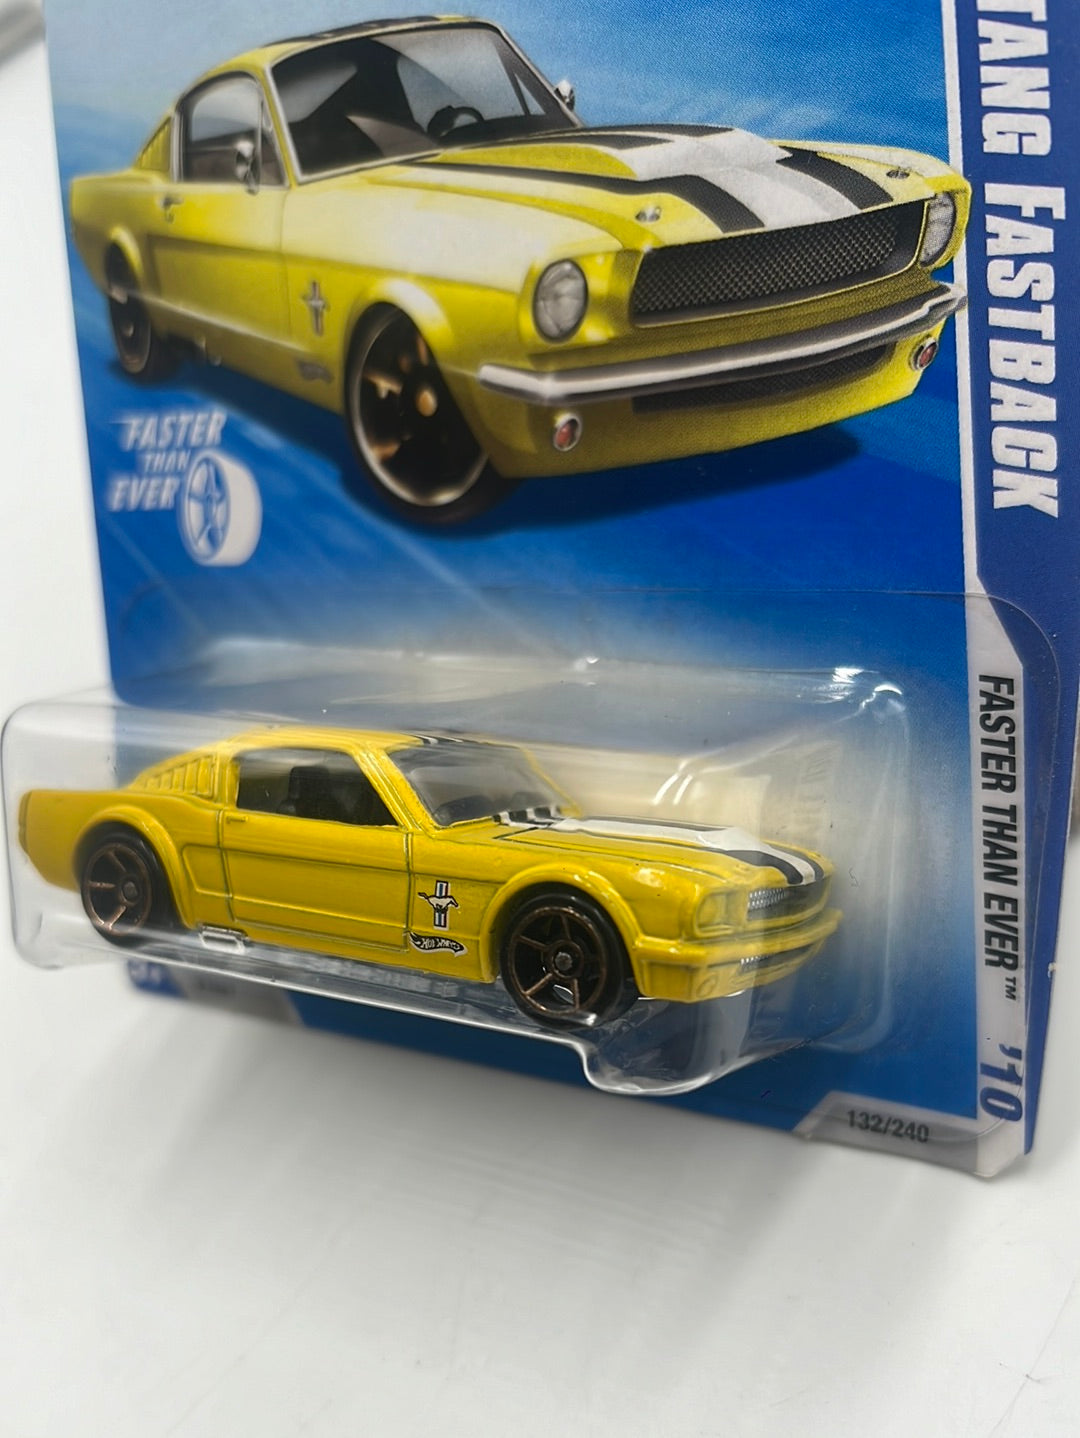 2010 Hot Wheels Faster Than Ever Ford Mustang Fastback Walmart Exclusive Yellow 132/240 236B